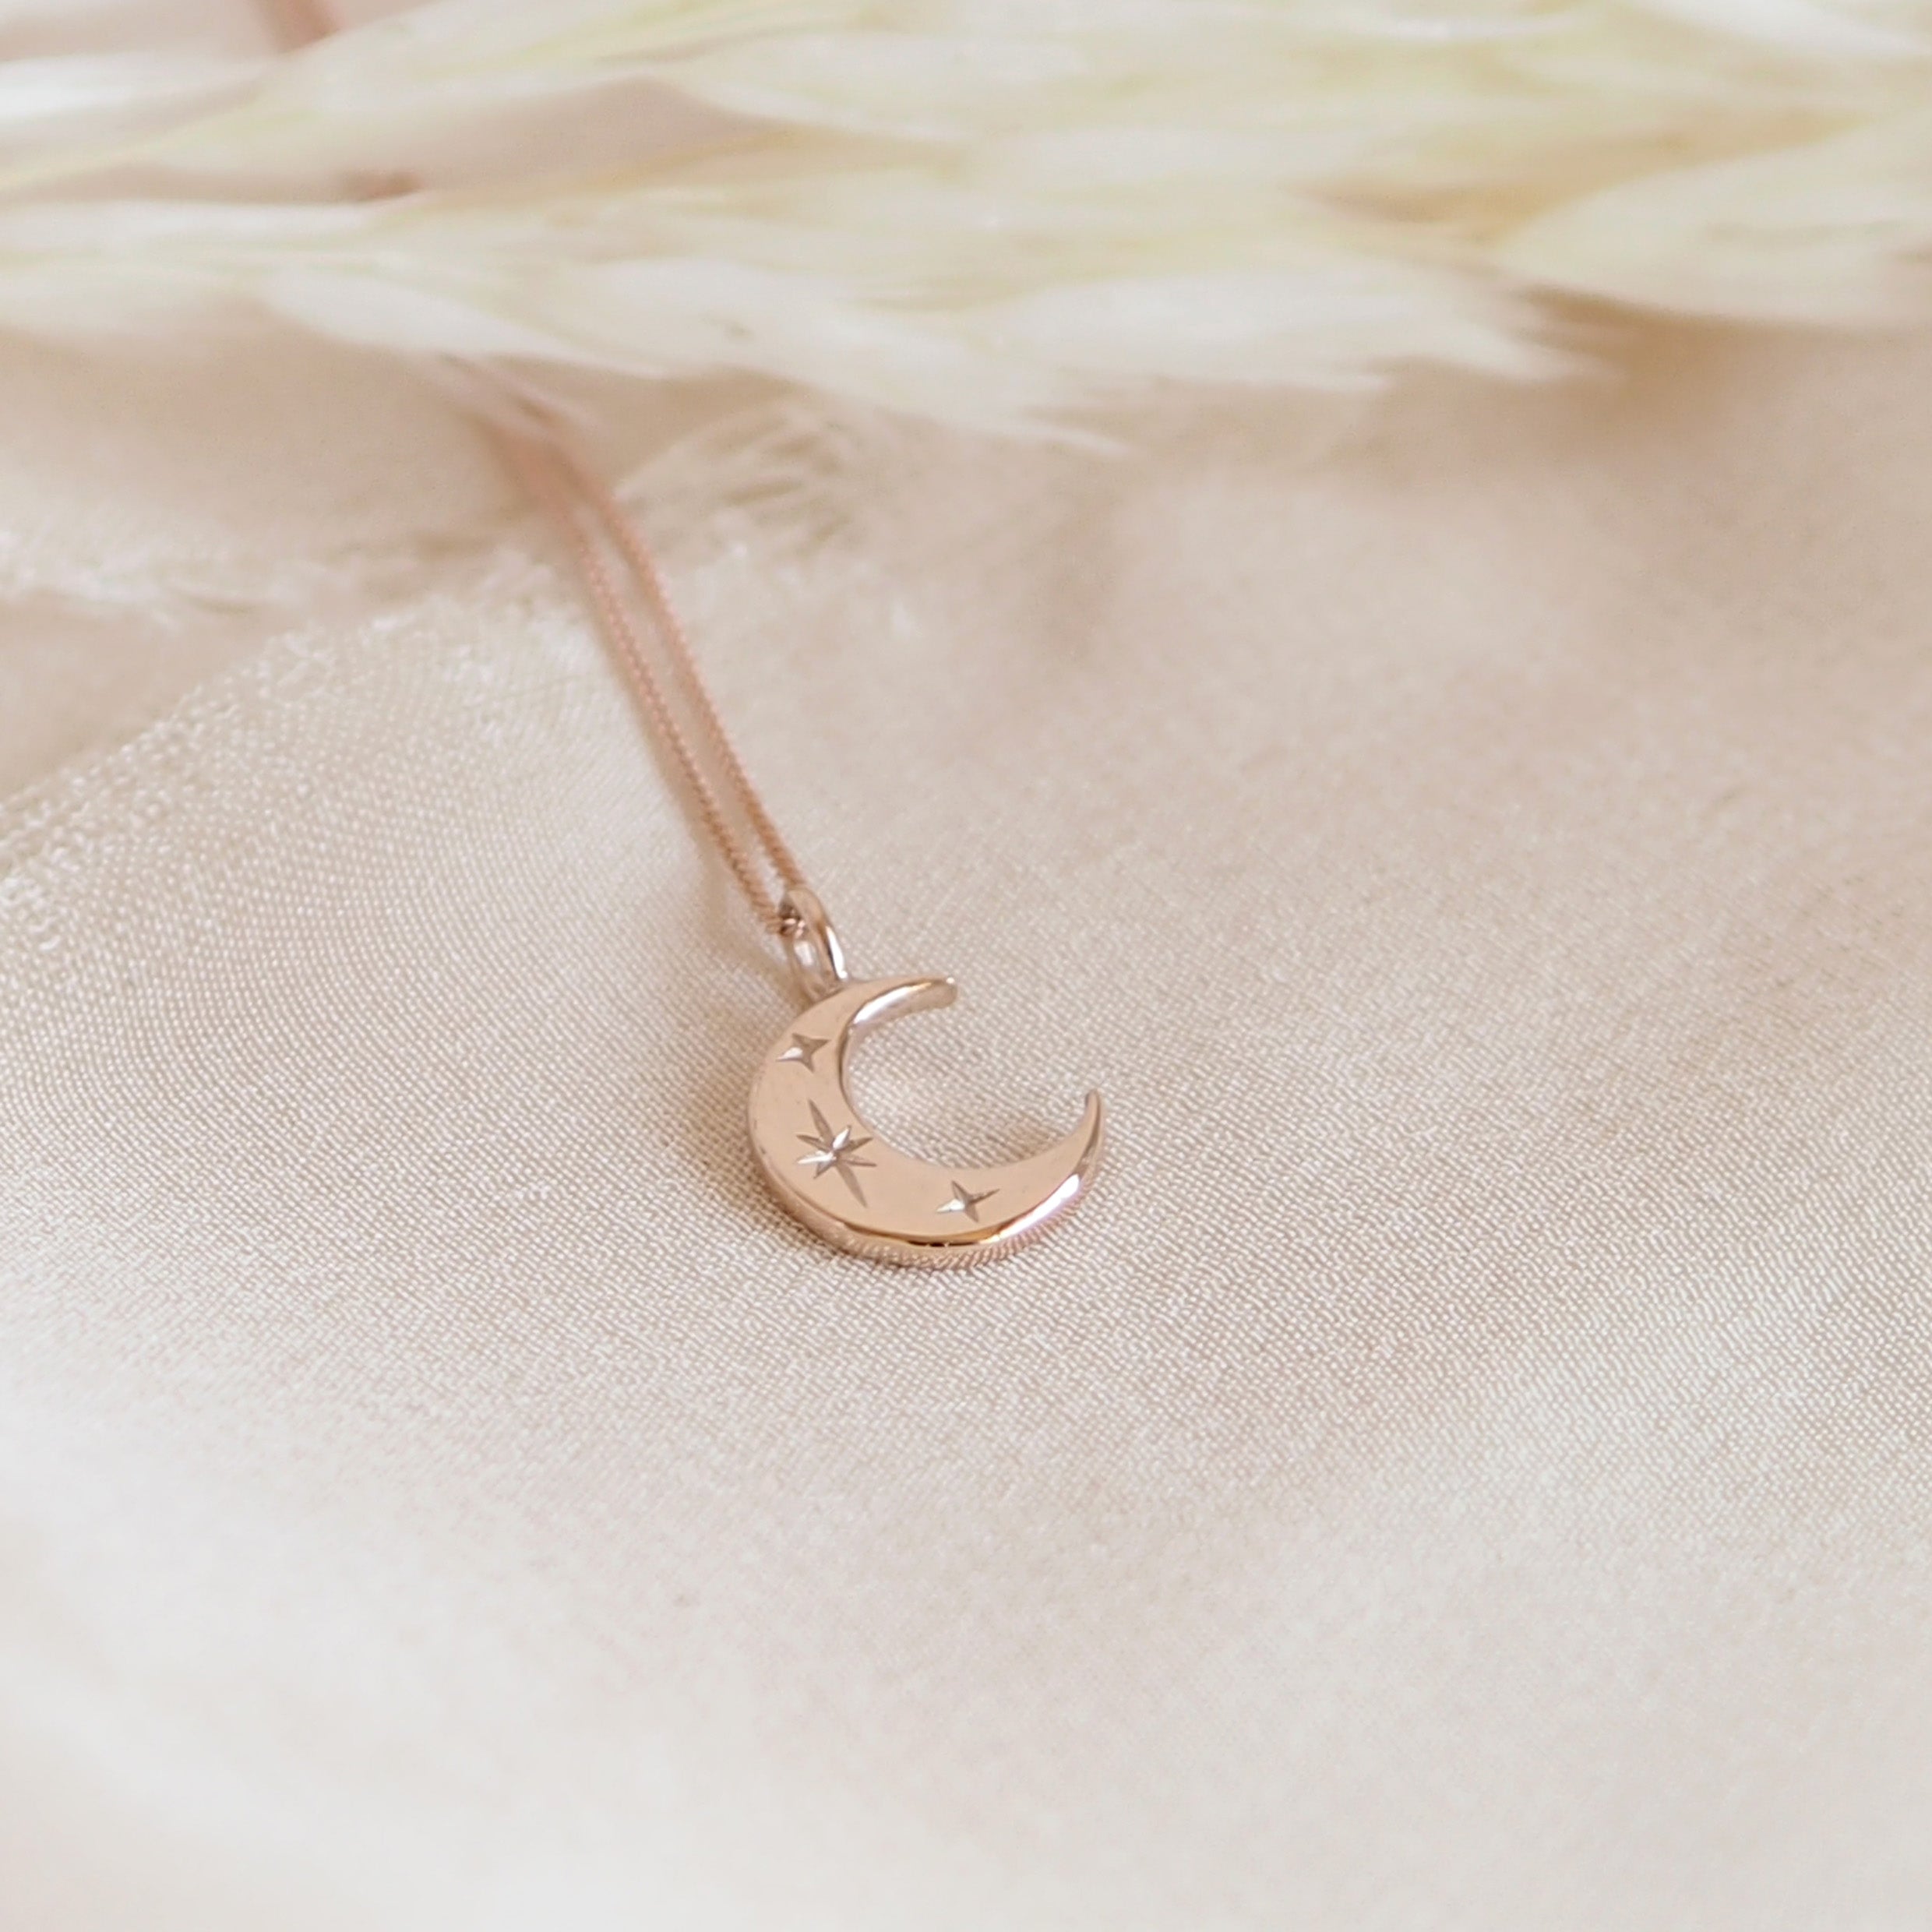 Crescent Moon Necklace in Solid 9ct Gold